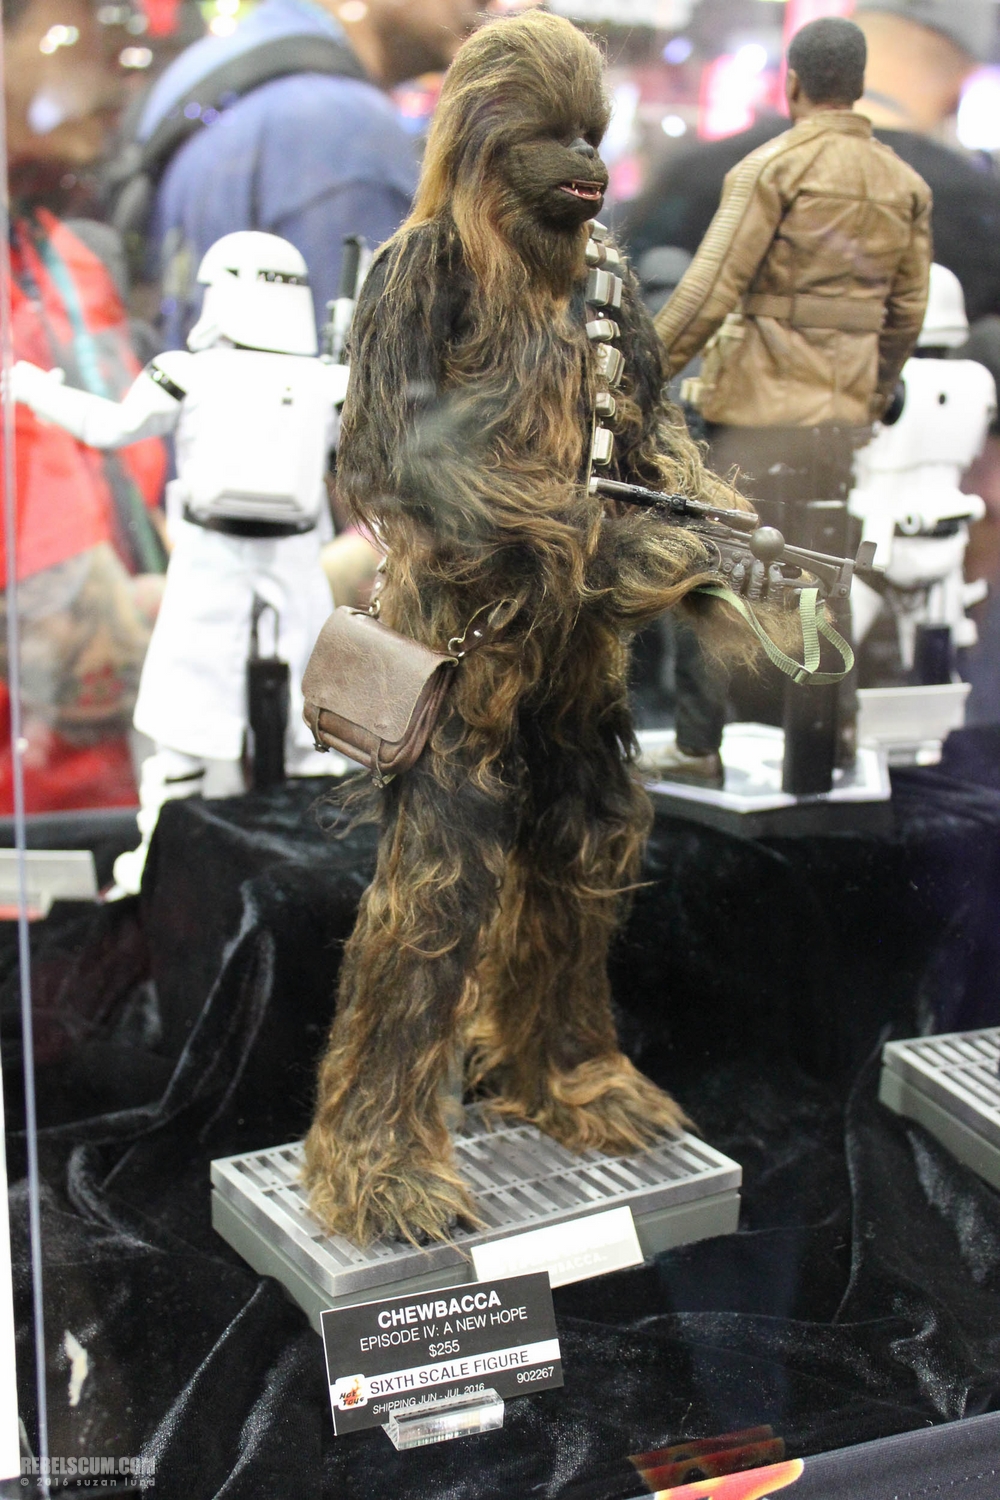 wondercon-2016-sideshow-collectibles-hot-toys-007.jpg